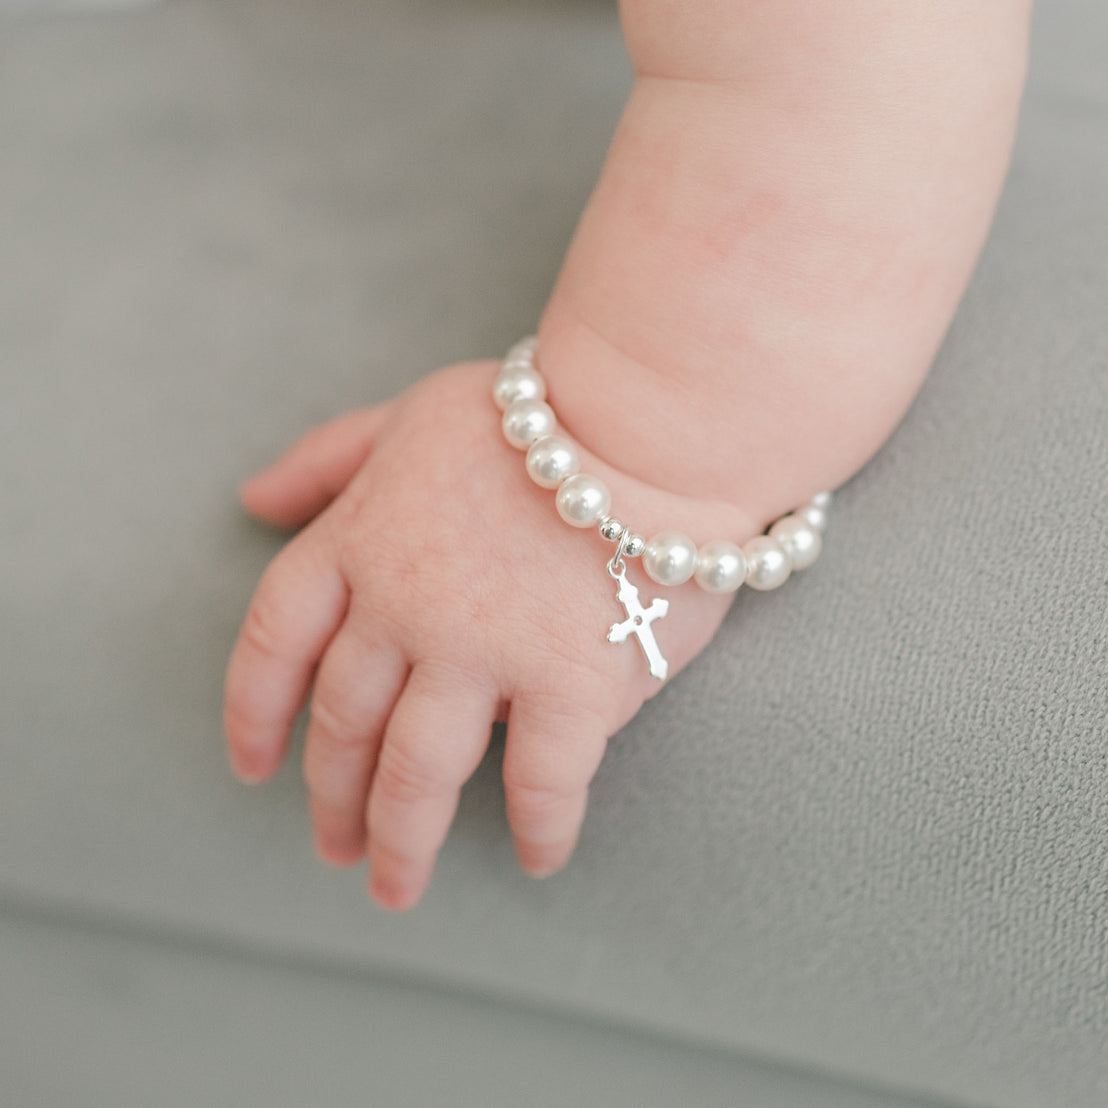 A close-up photo of a baby's wrist adorned with a White Luster Pearl Bracelet with Silver Cross, resting on a soft gray surface.